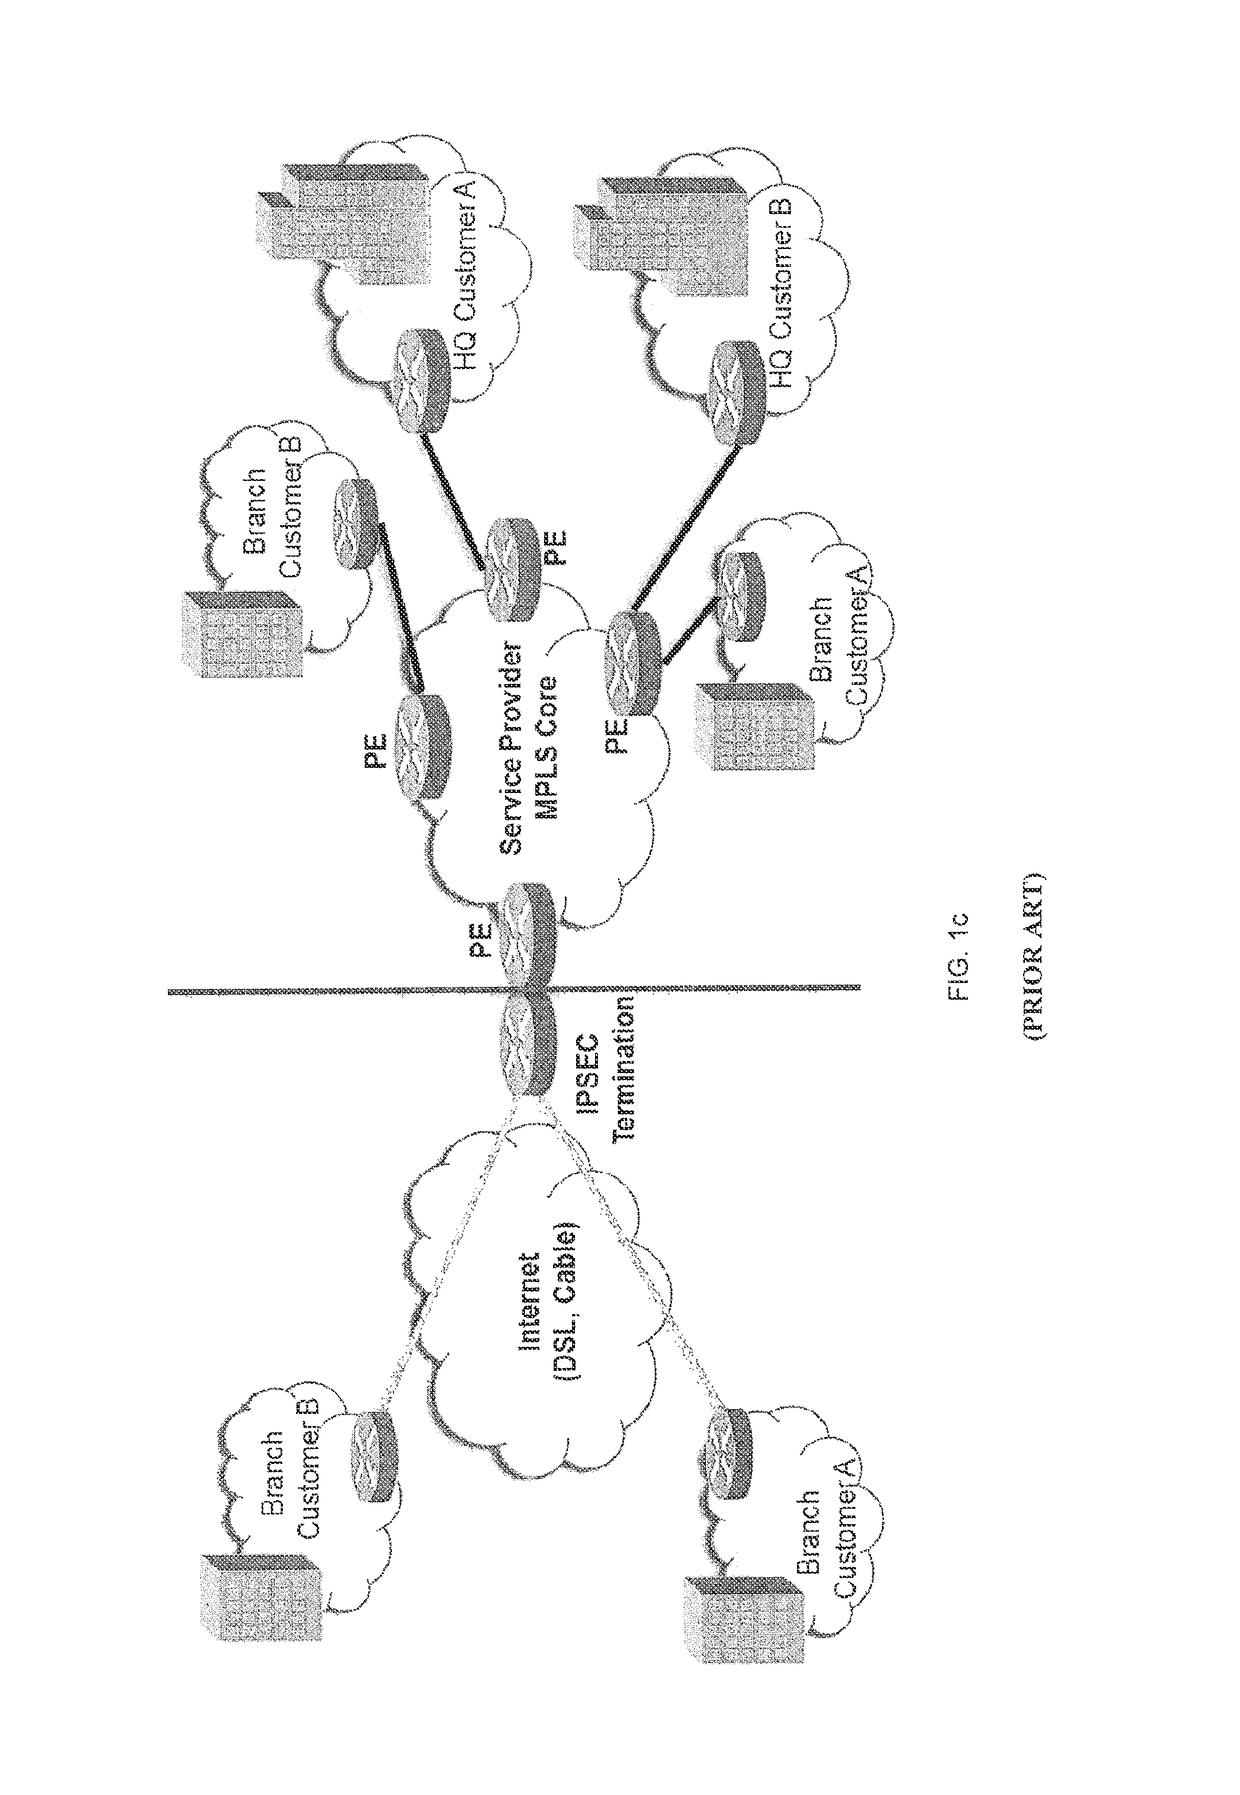 System, apparatus and method for providing aggregation of connections with a secure and trusted virtual network overlay